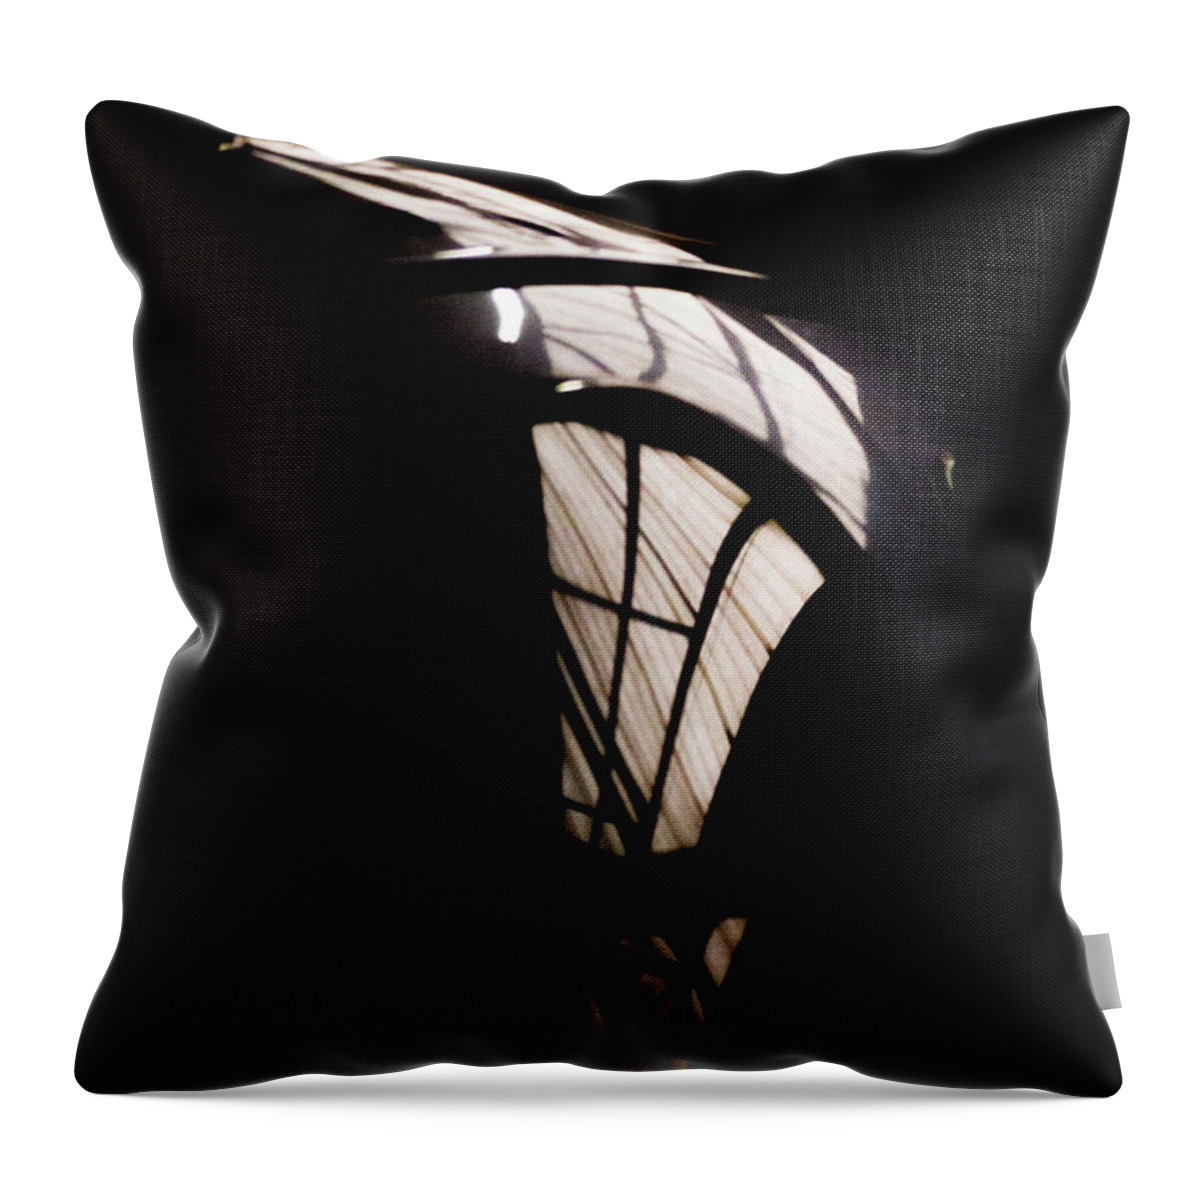 Airbus B3 Throw Pillow featuring the photograph Another Door by Paul Job